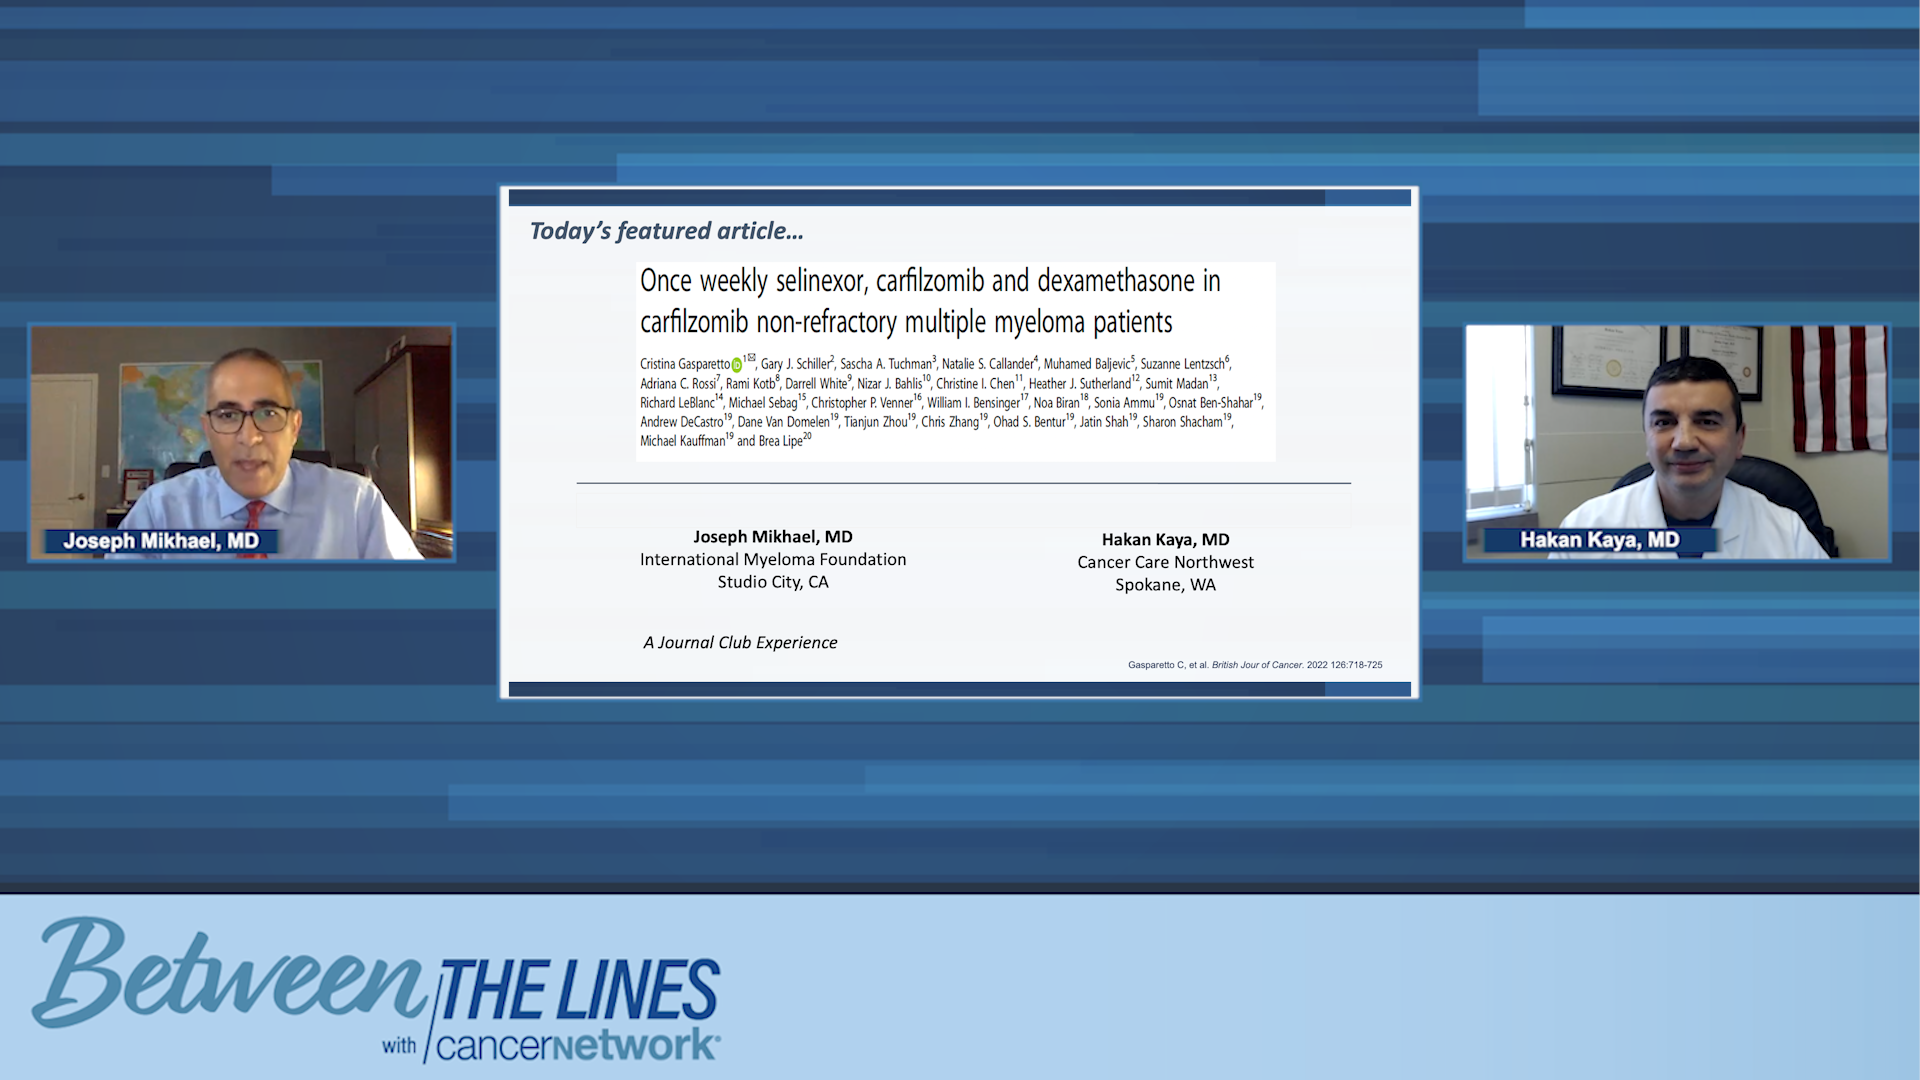 Between The Lines: Once Weekly Selinexor, Carfilzomib & Dexamethasone in Carfilzomib Non-Refractory Multiple Myeloma Patients  